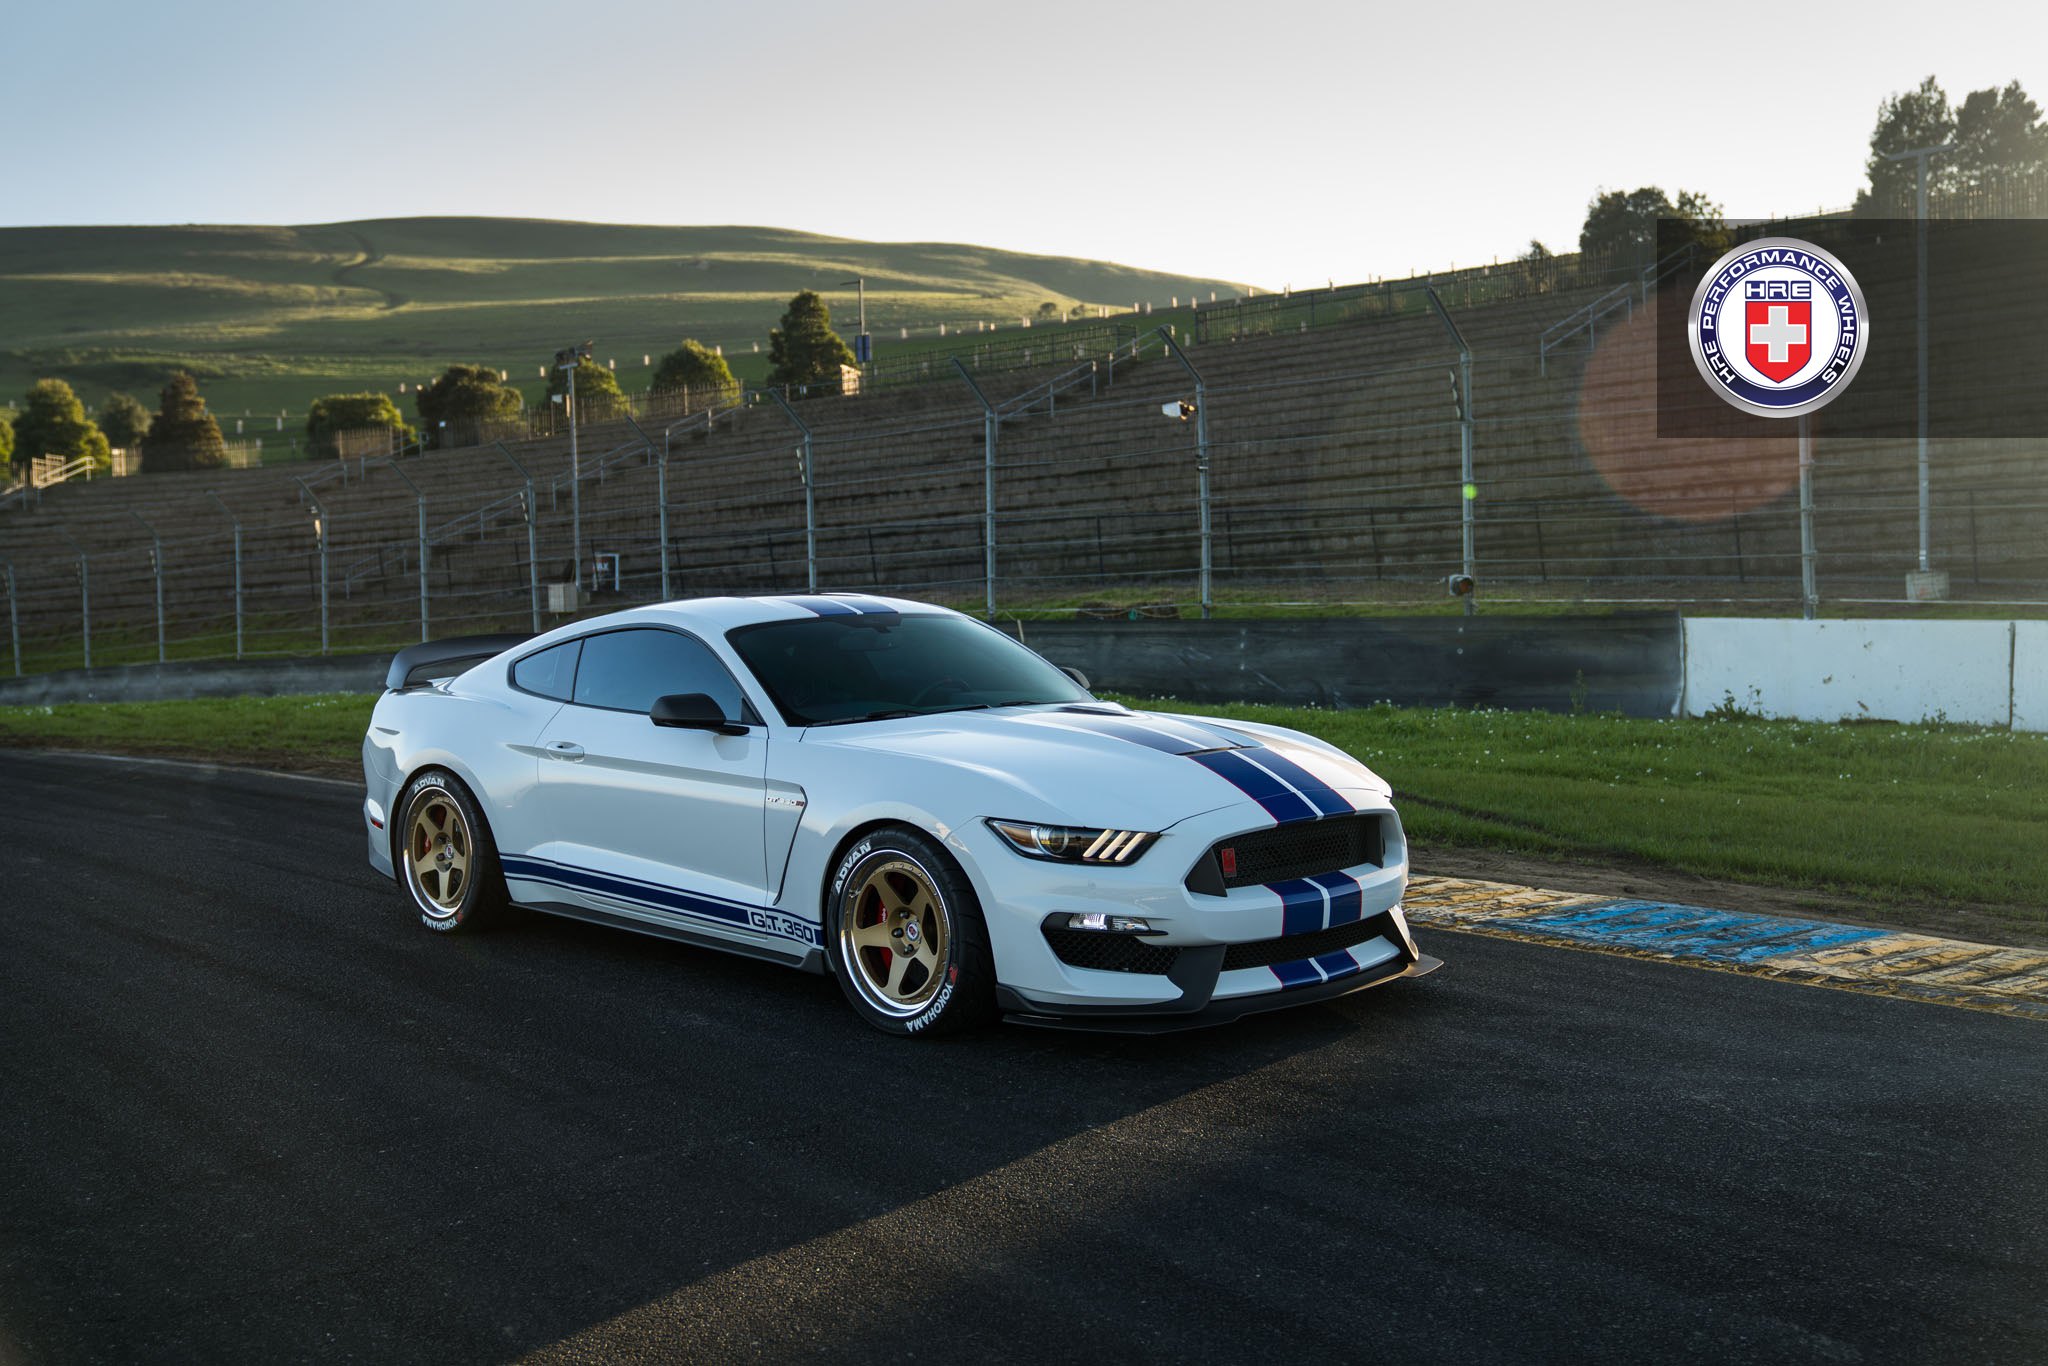 Aftermarket Side Skirts on White Ford Mustang 5.0 - Photo by HRE Wheels